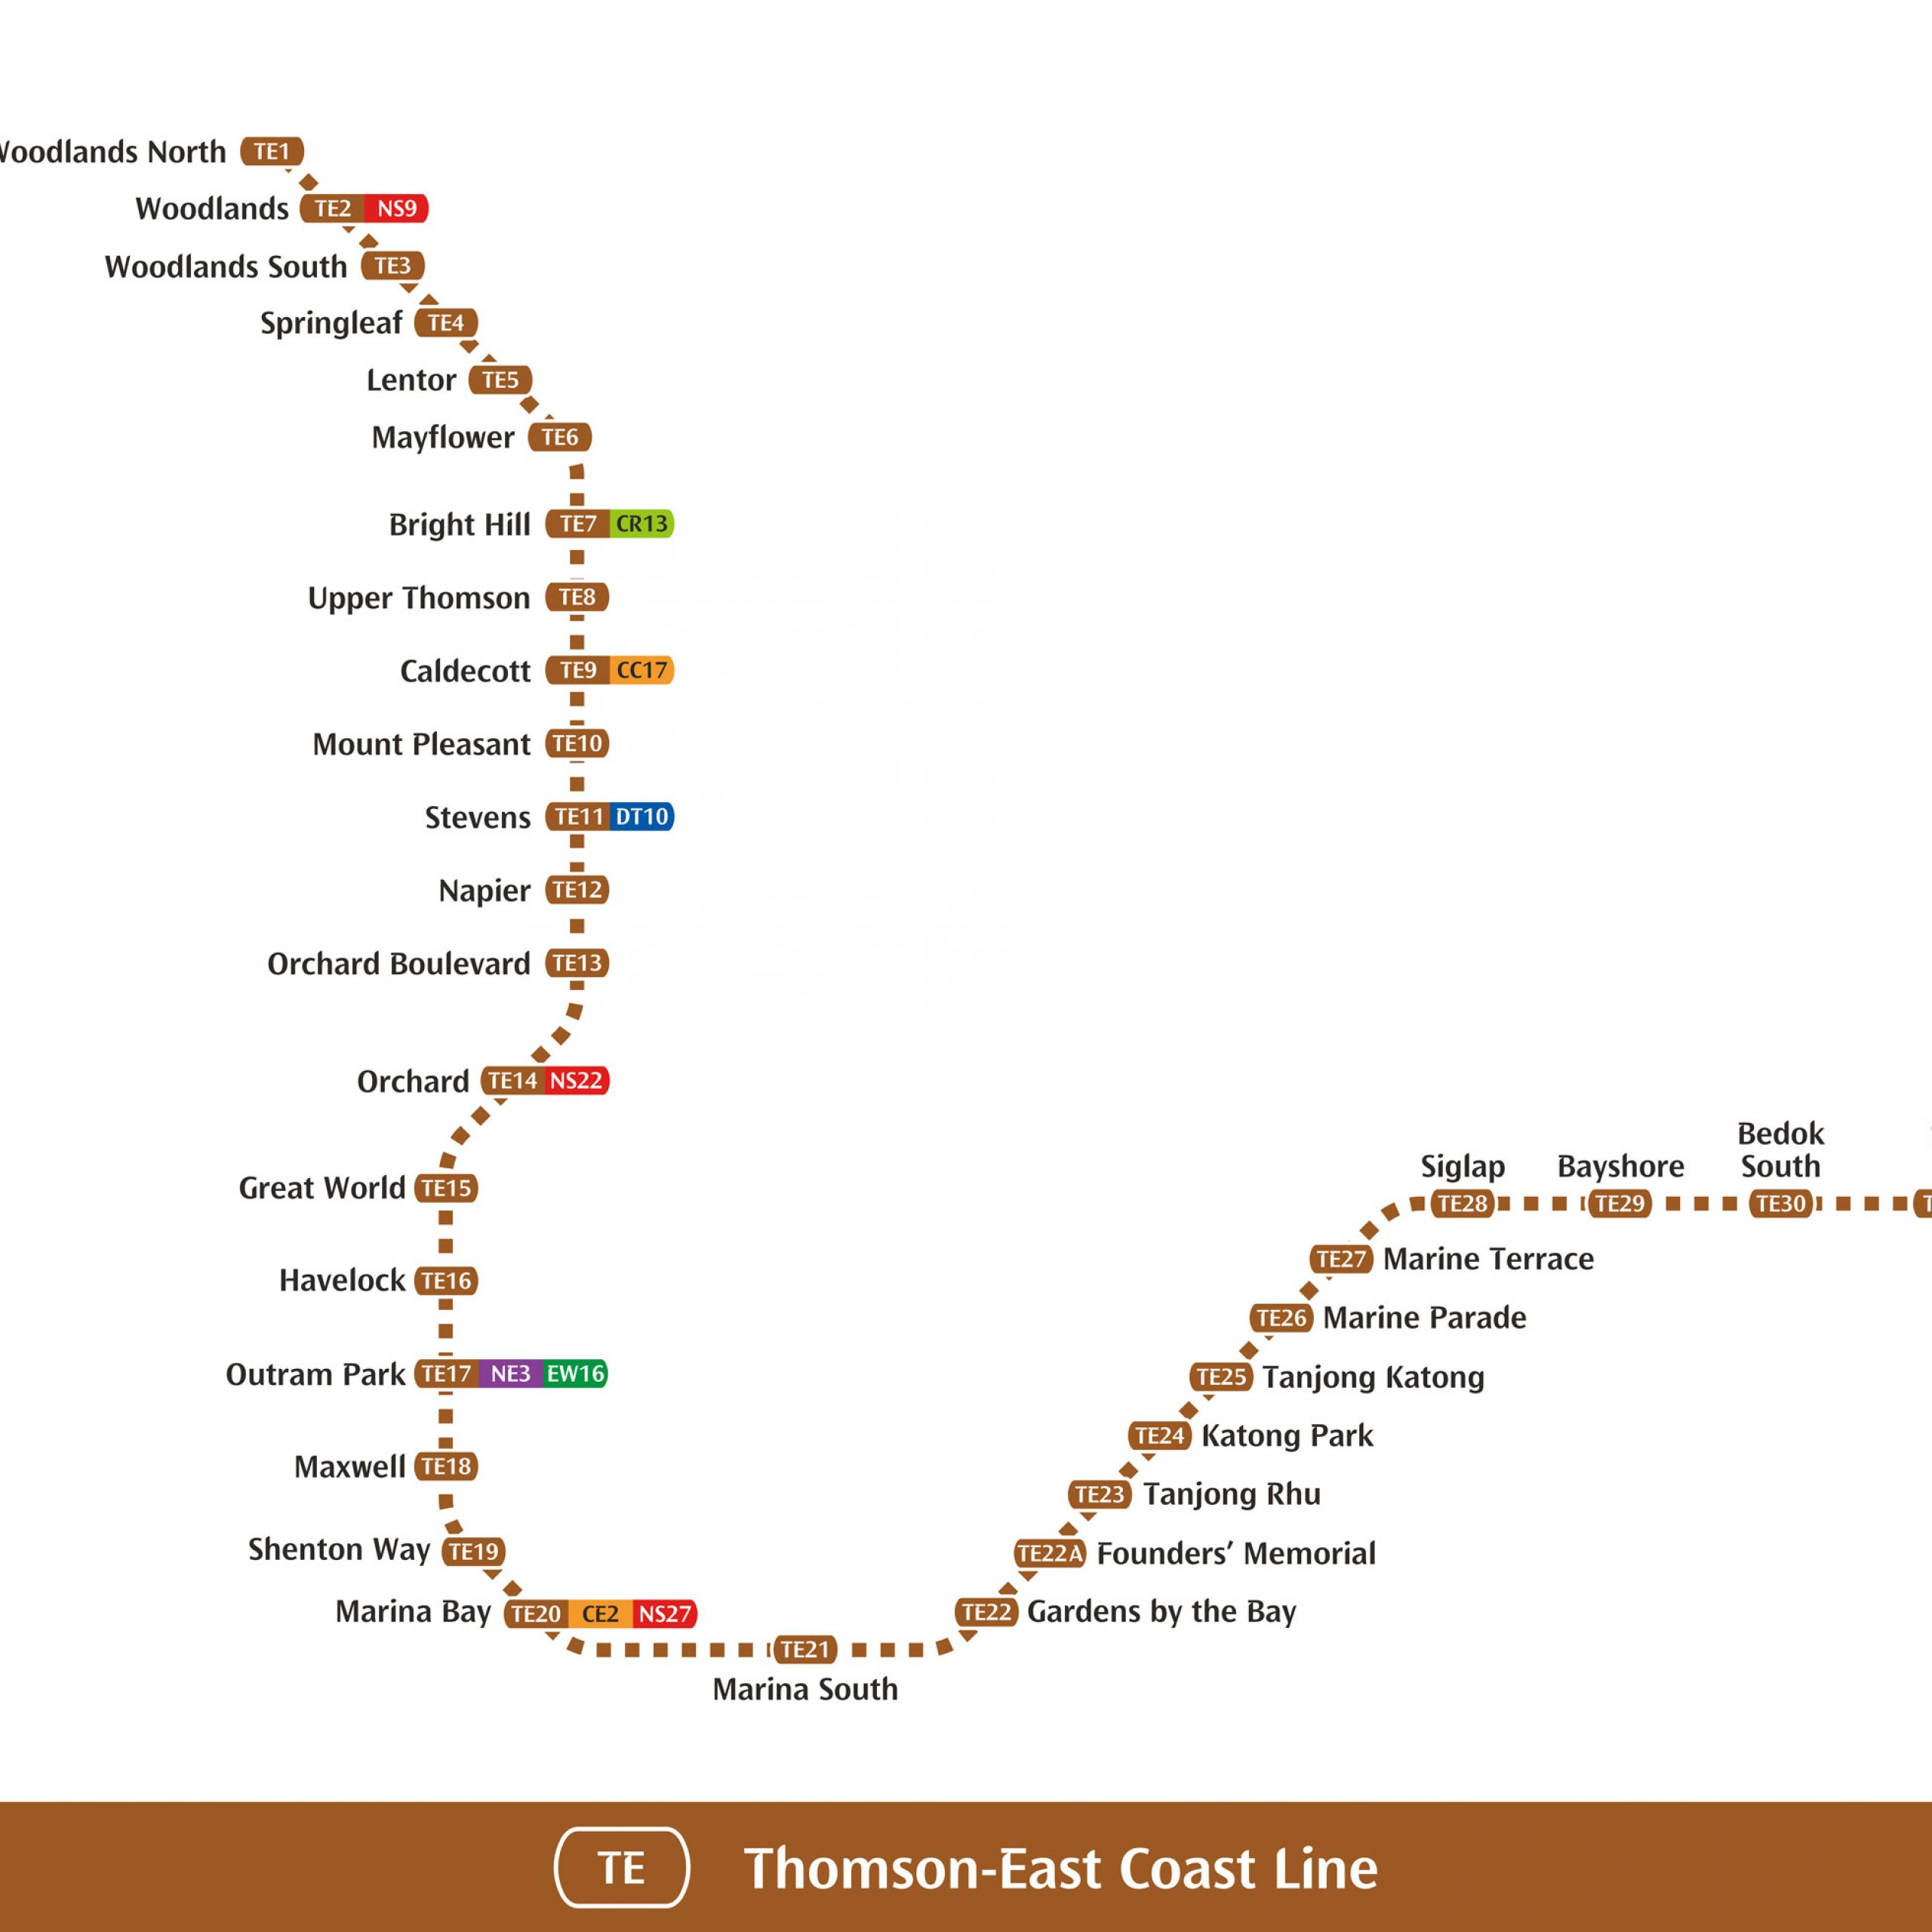 mrt travel time between stations